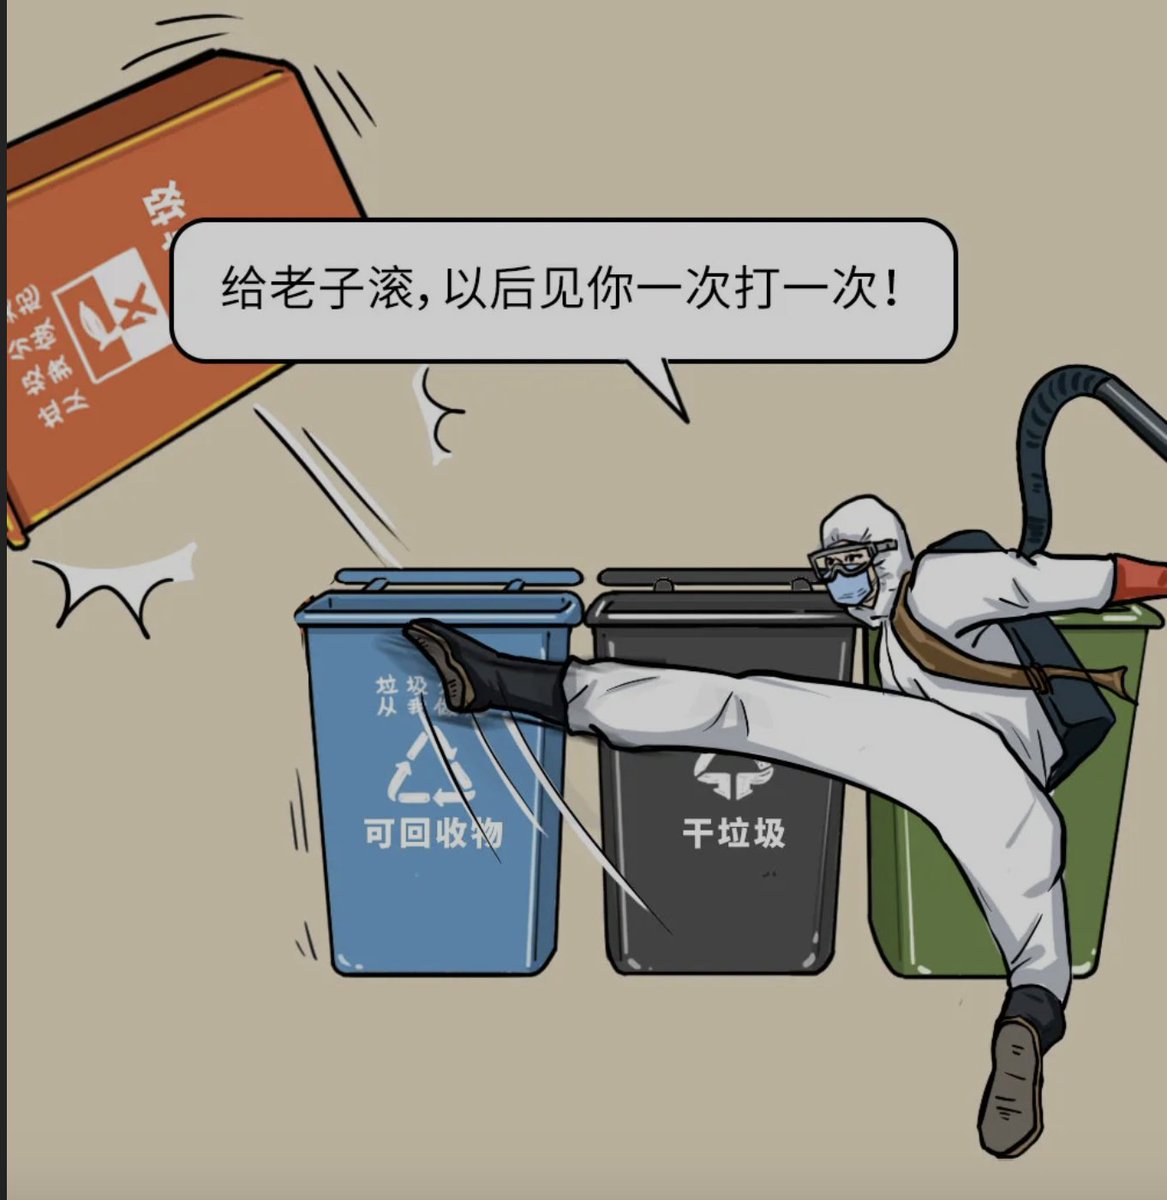 A final cartoon of the worker kicking away the trash can. The xenophobia is ugly and revolting, and has been flourishing online in various forms. Not a ton of government effort to walk it back. Wonder how much they can walk back when it's all over.